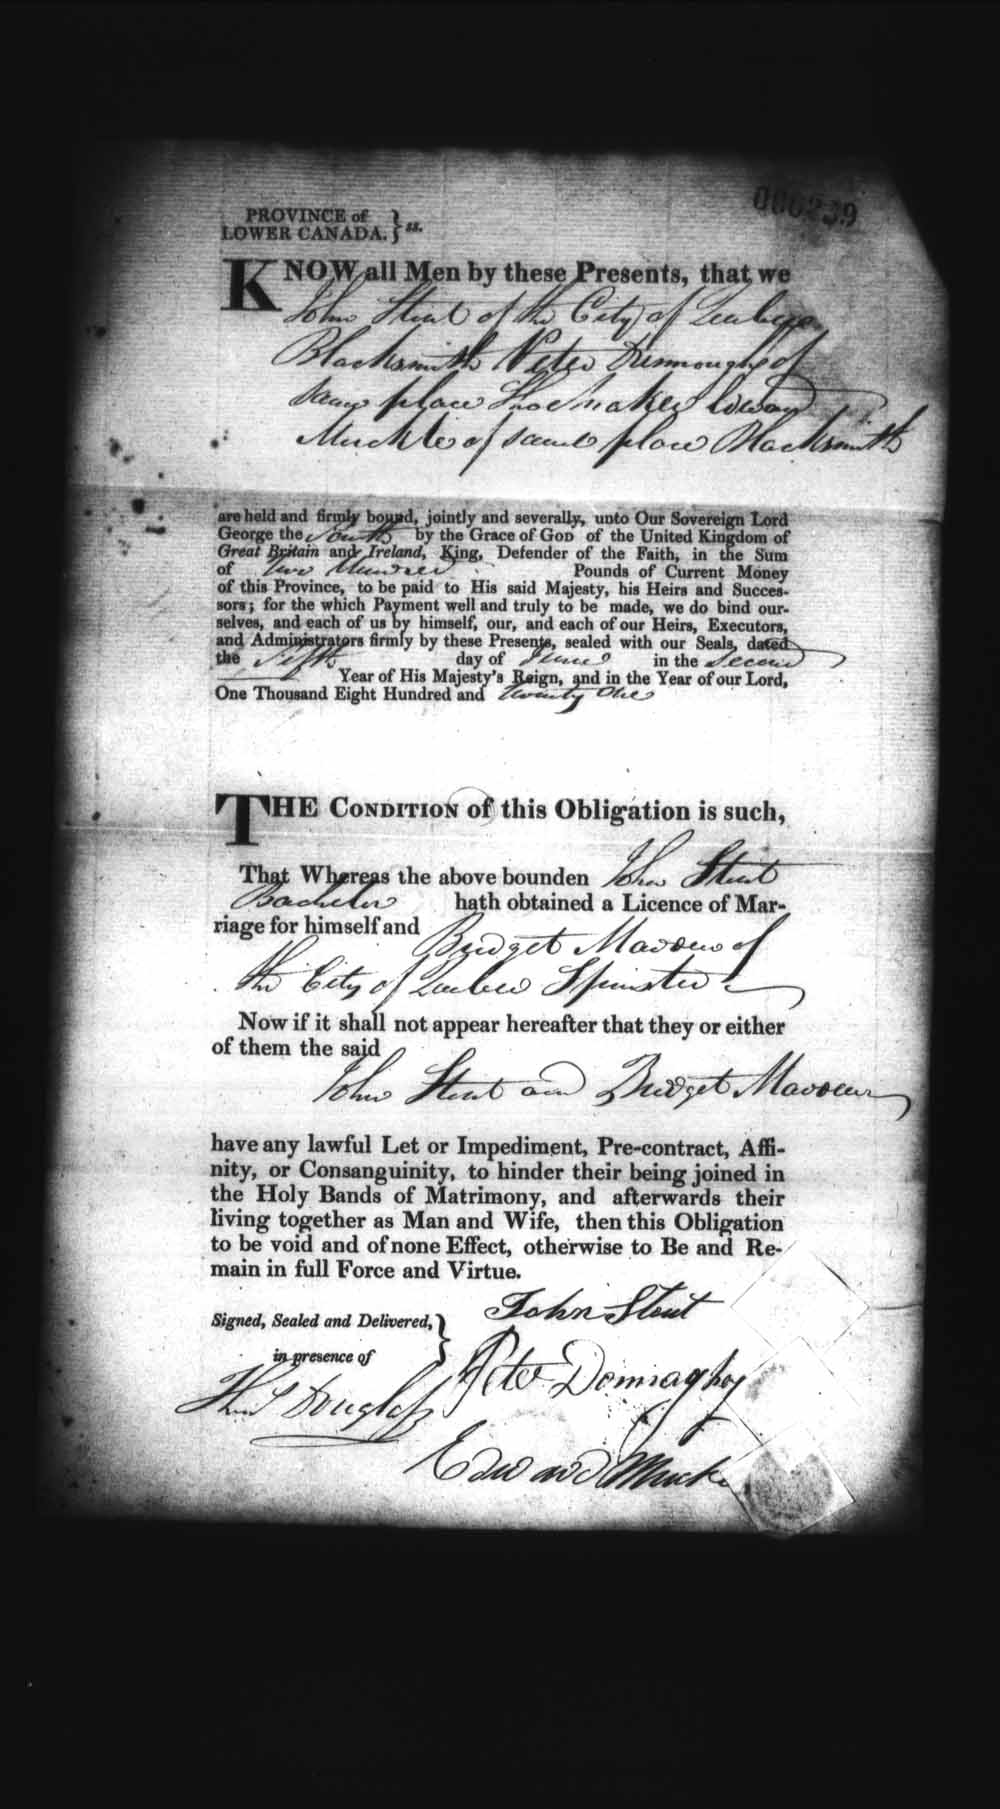 Digitized page of Upper and Lower Canada Marriage Bonds (1779-1865) for Image No.: e008236098